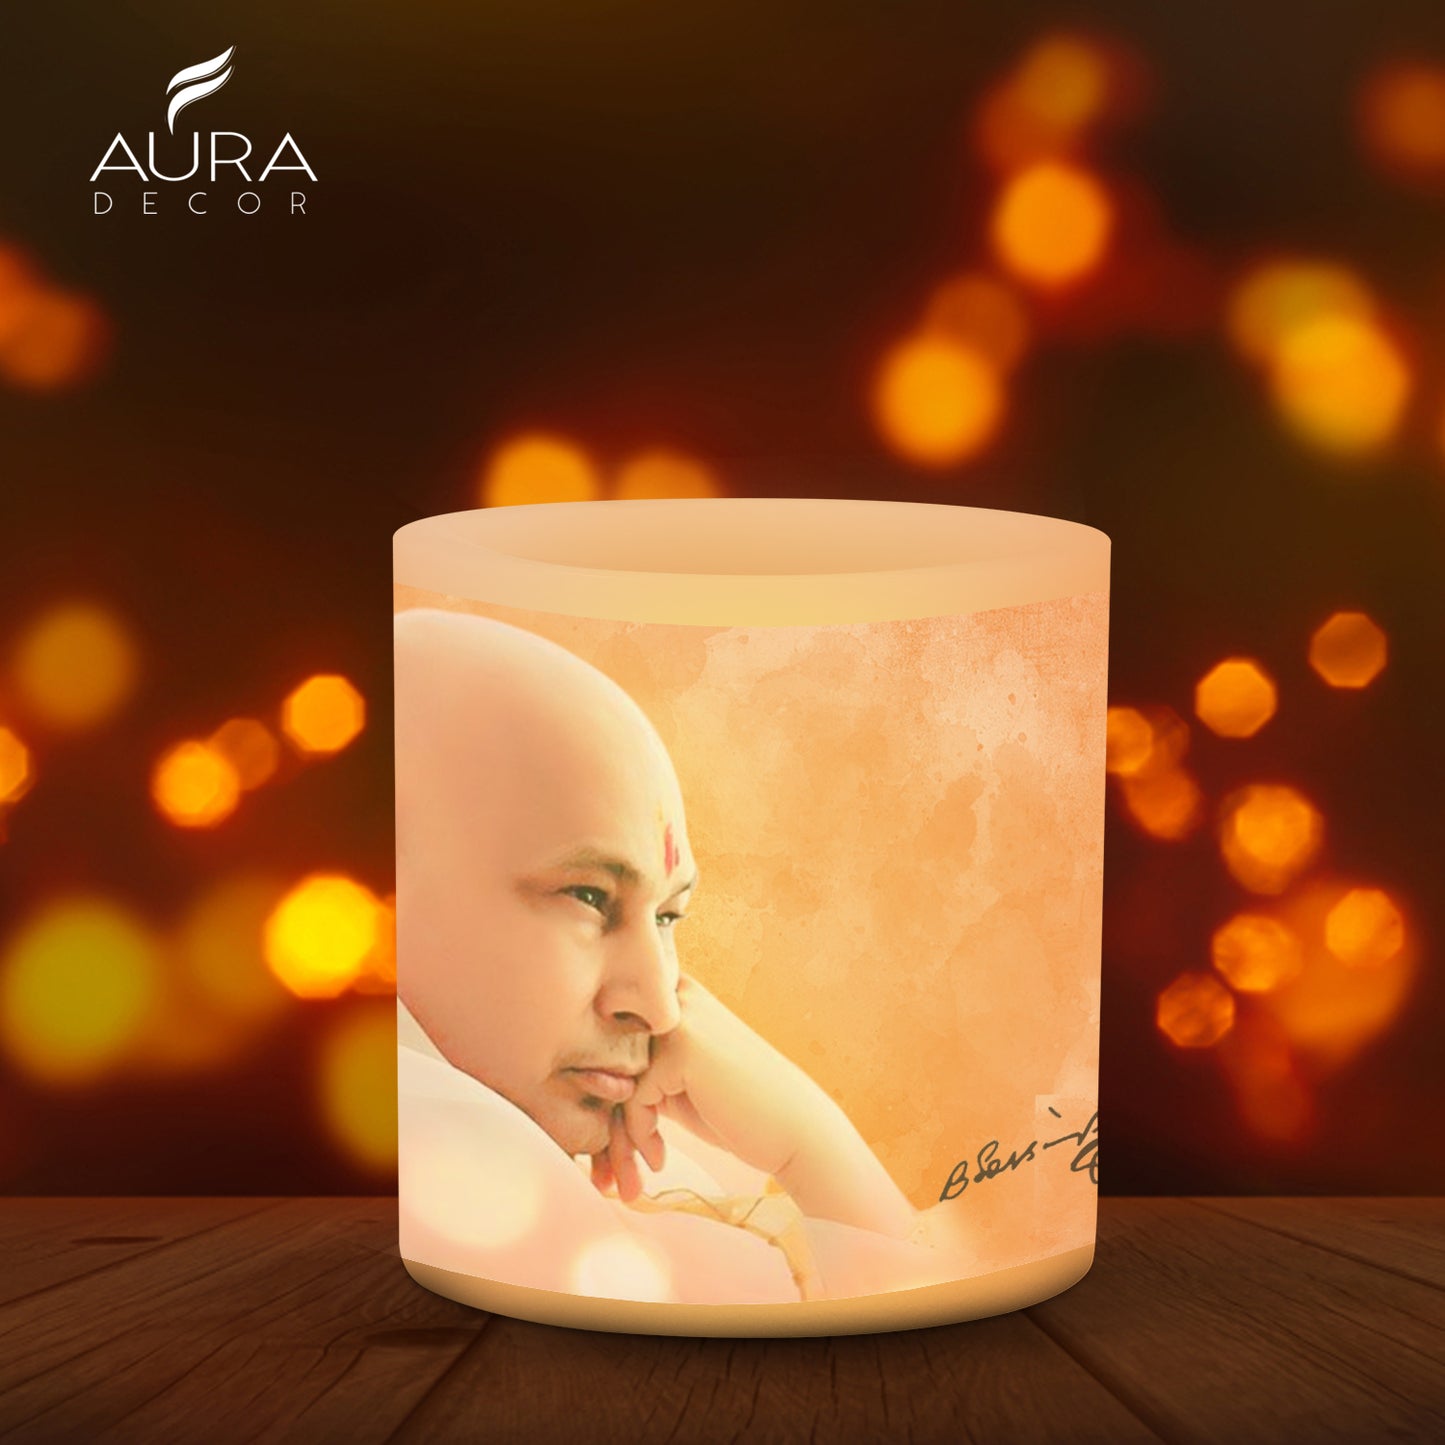 AuraDecor Divine Hollow Candle with a Tealight Free